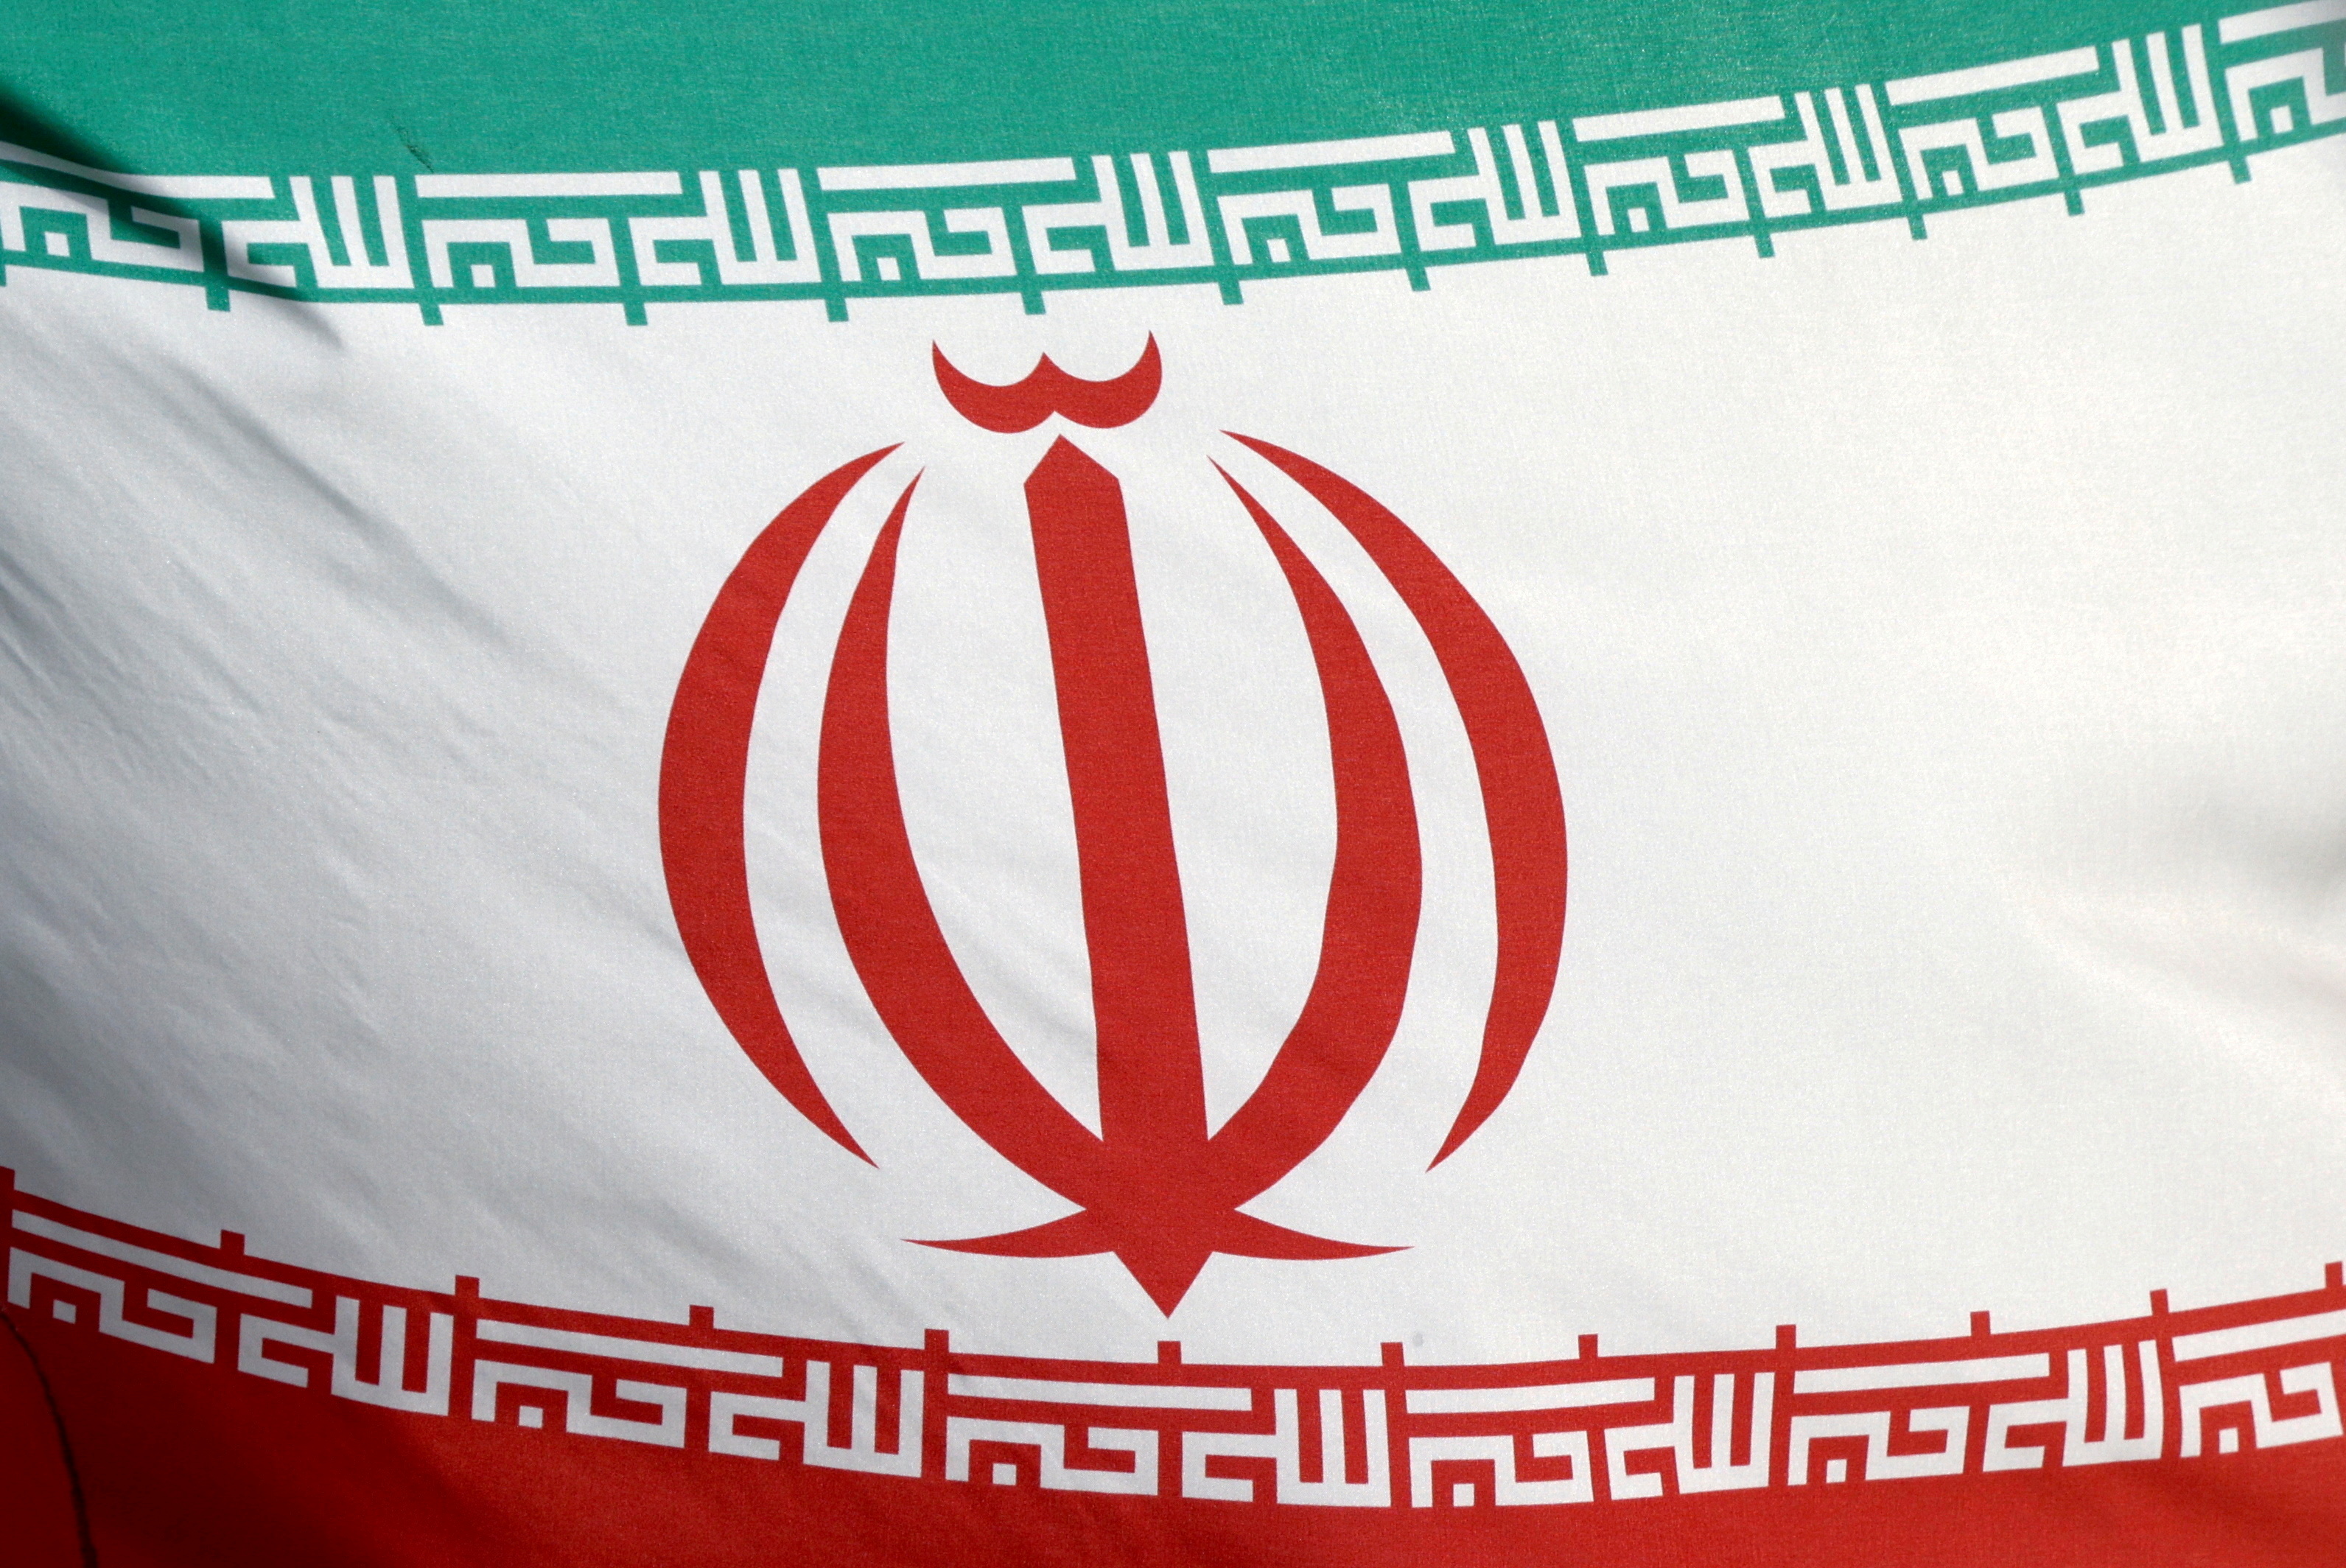 FILE PHOTO: The Iranian flag flies in front of the IAEA headquarters in Vienna